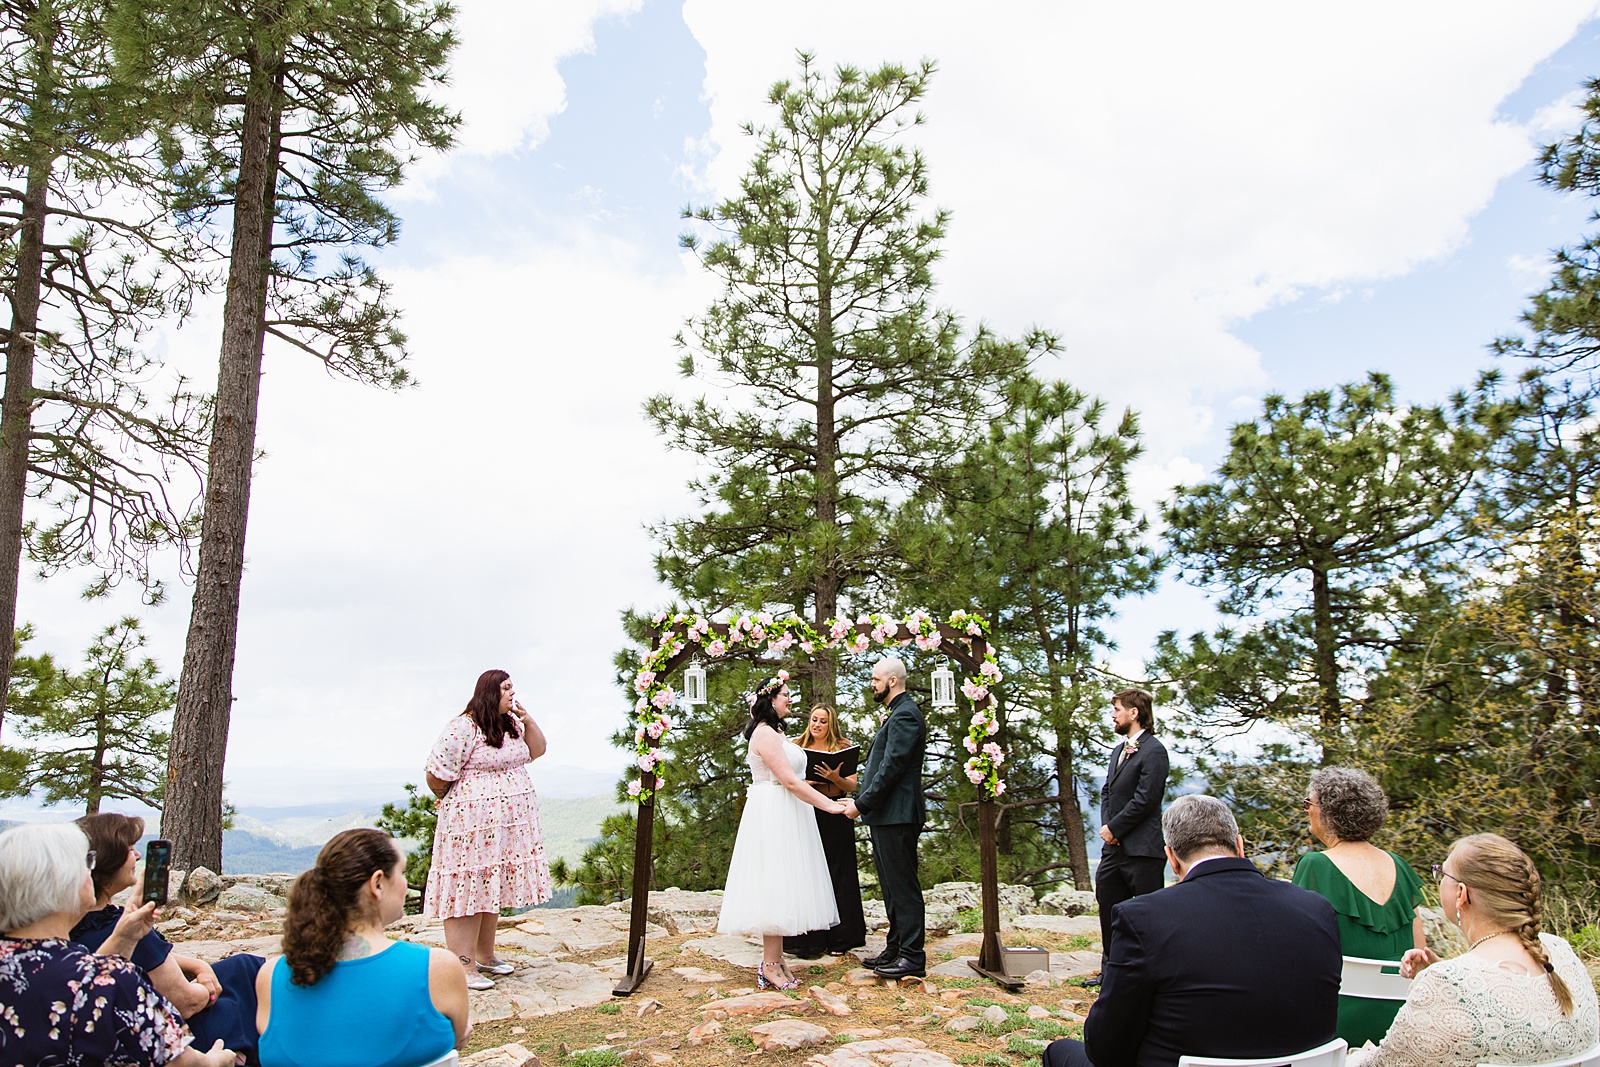 Bride & Groom togethering during Mogollon Rim wedding ceremony by Payson elopement photographer Juniper & Co.